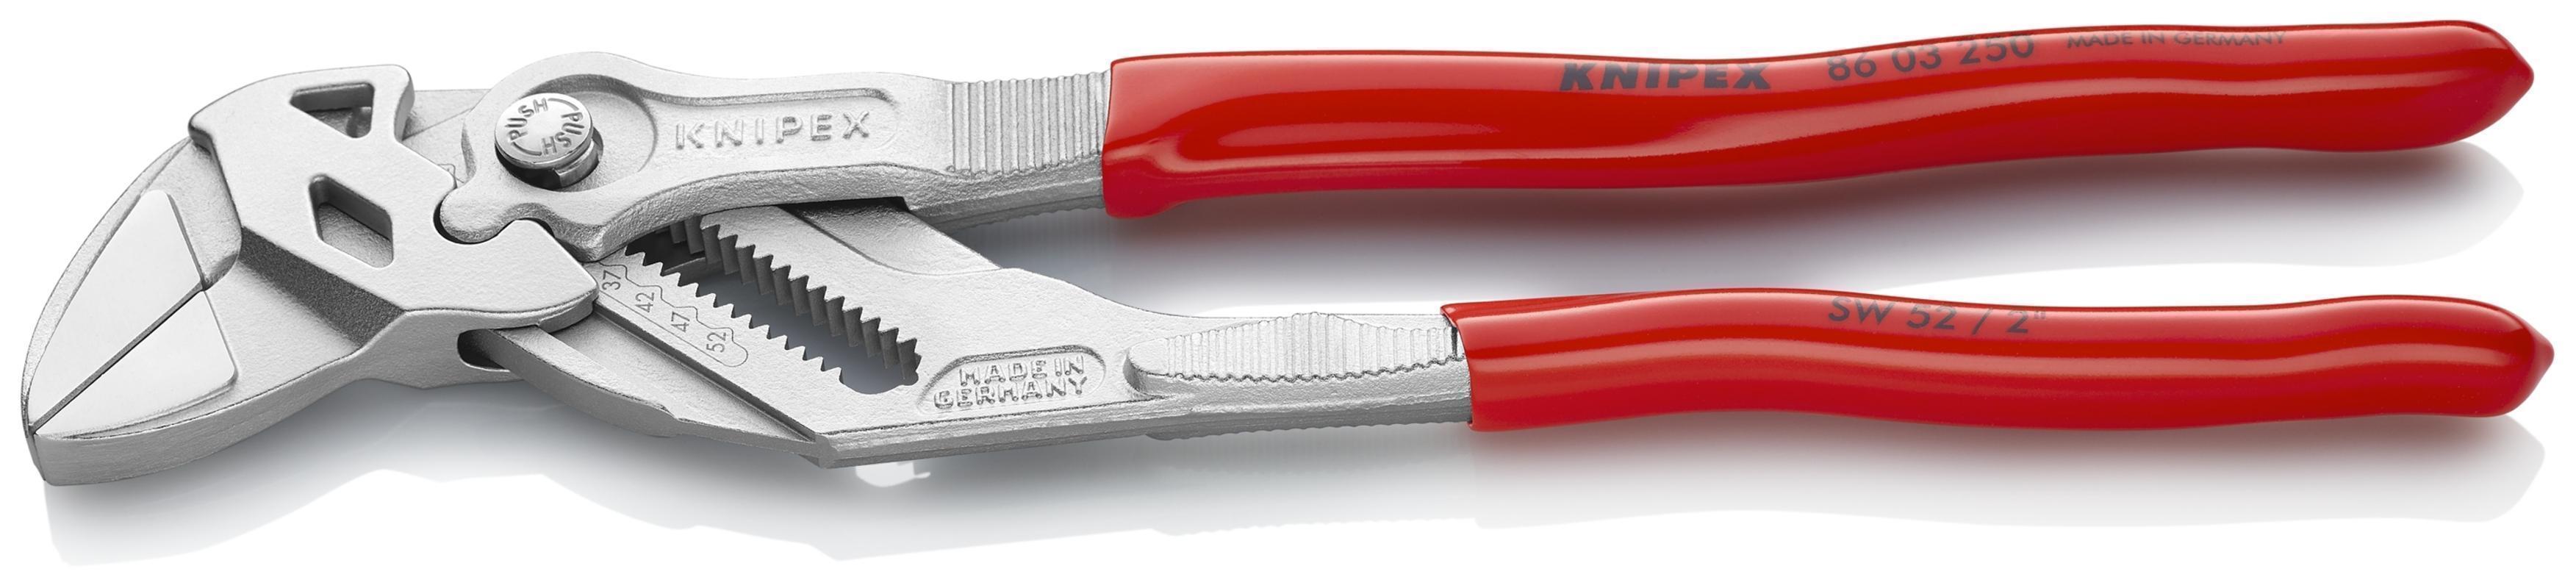 Knipex® 86 03 180 Plier Wrench, 1-3/8 in, 13/64 x 5/16 x 15/32 in Straight Chrome Vanadium Steel Jaw, 7-1/4 in OAL